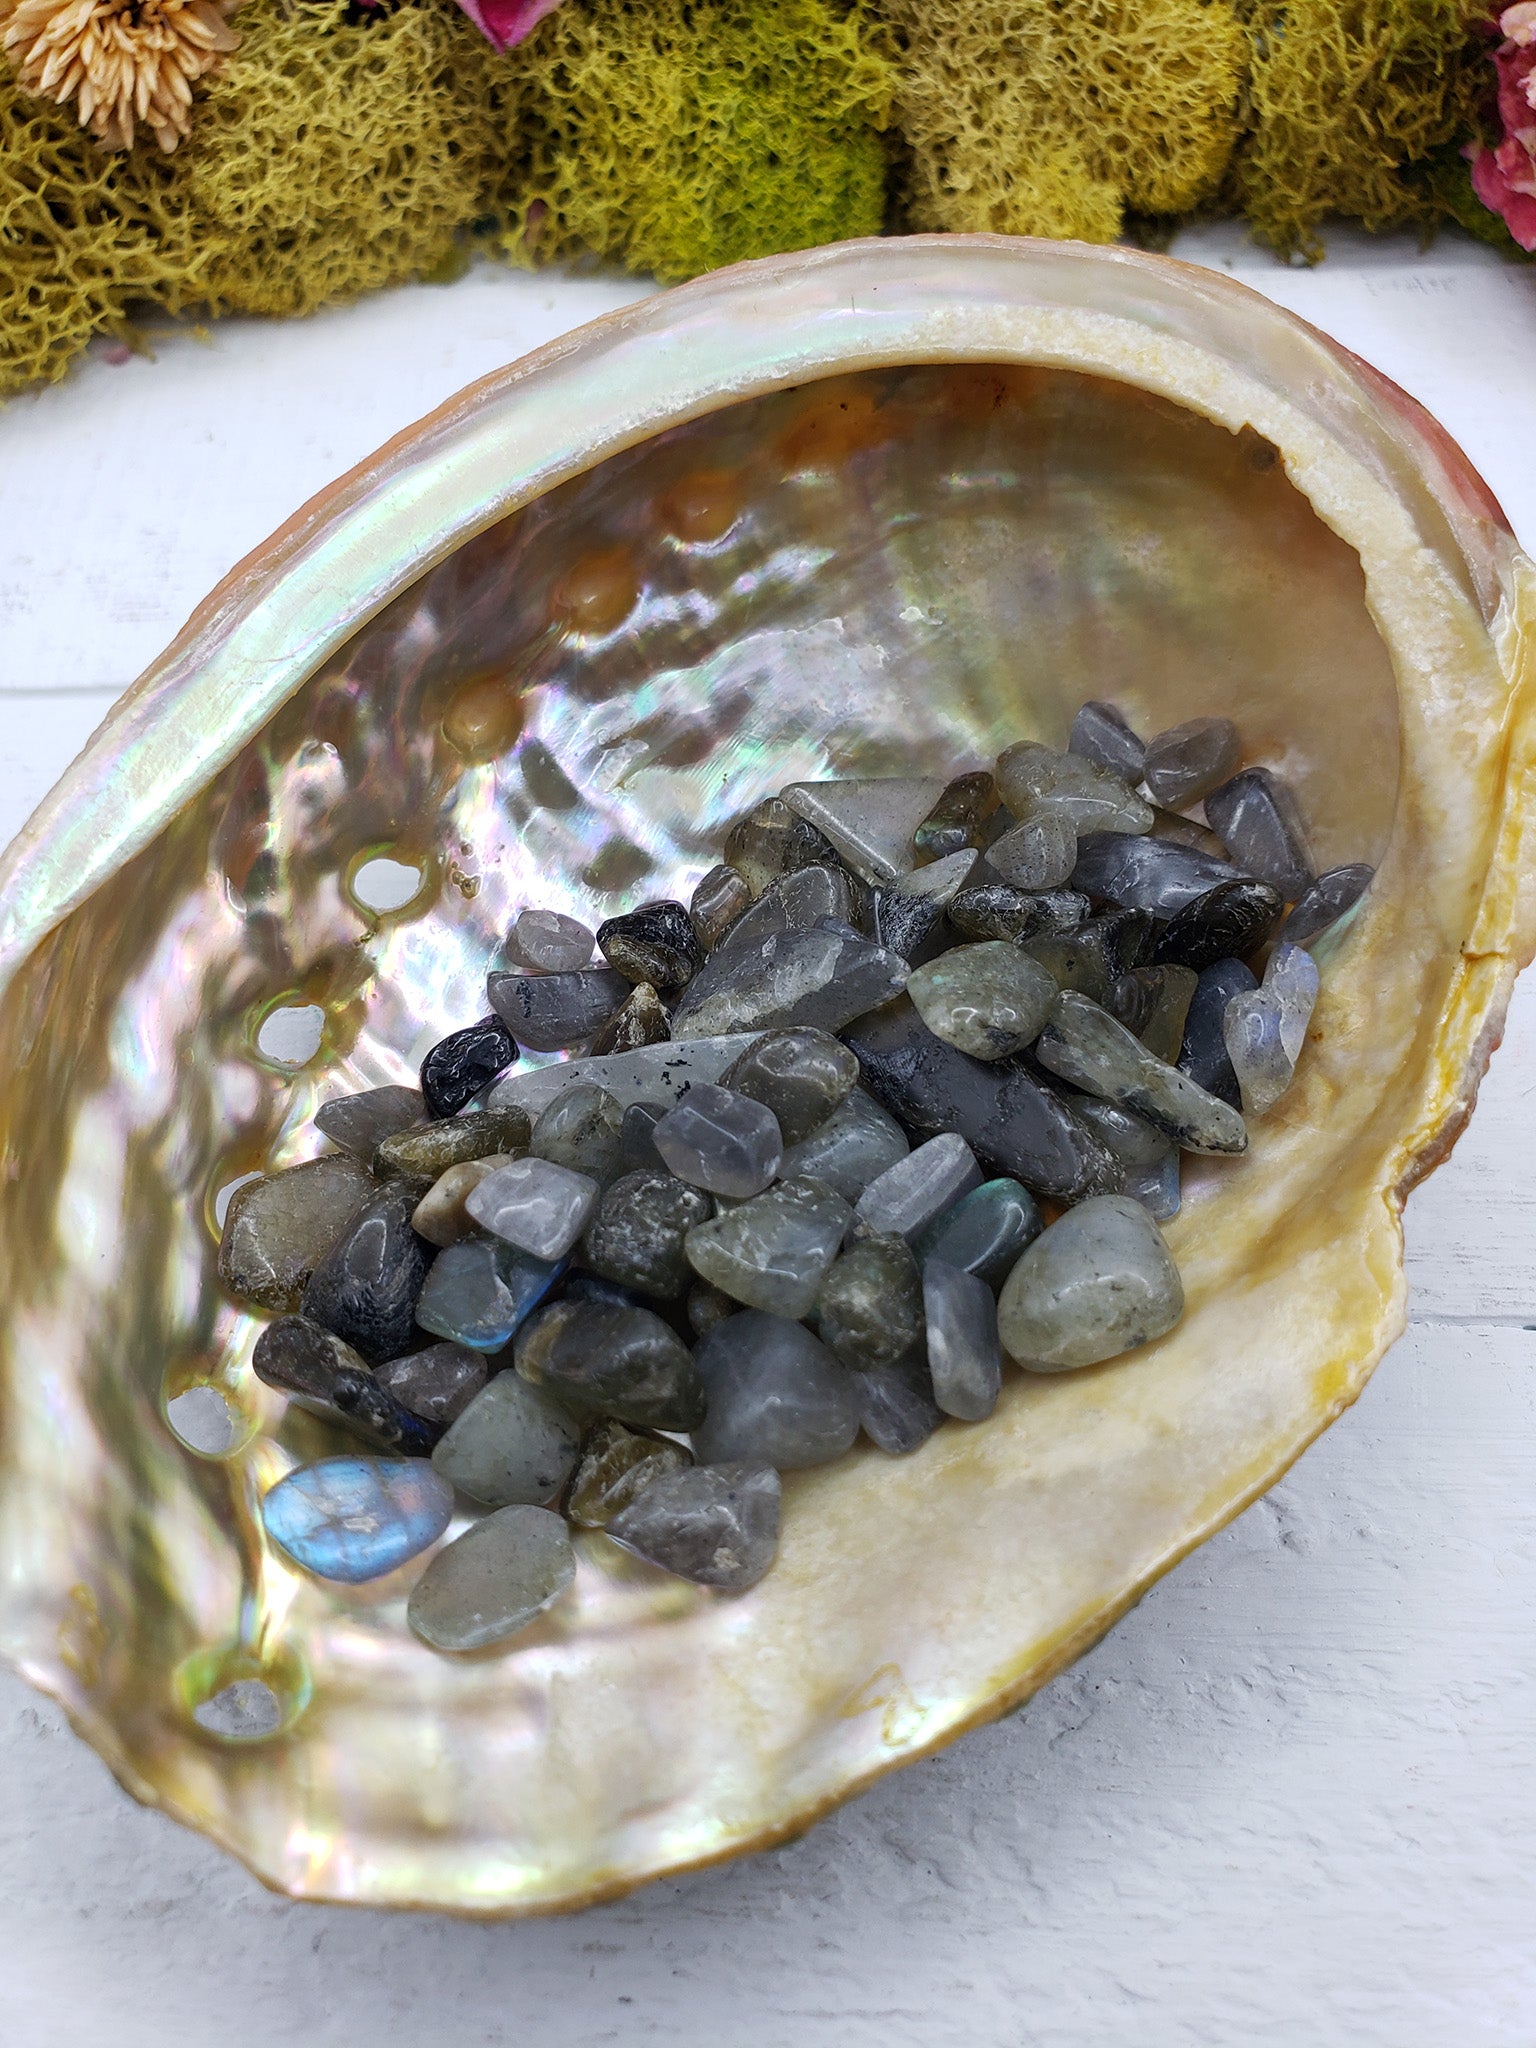 One ounce of labradorite crystal chips in abalone shell